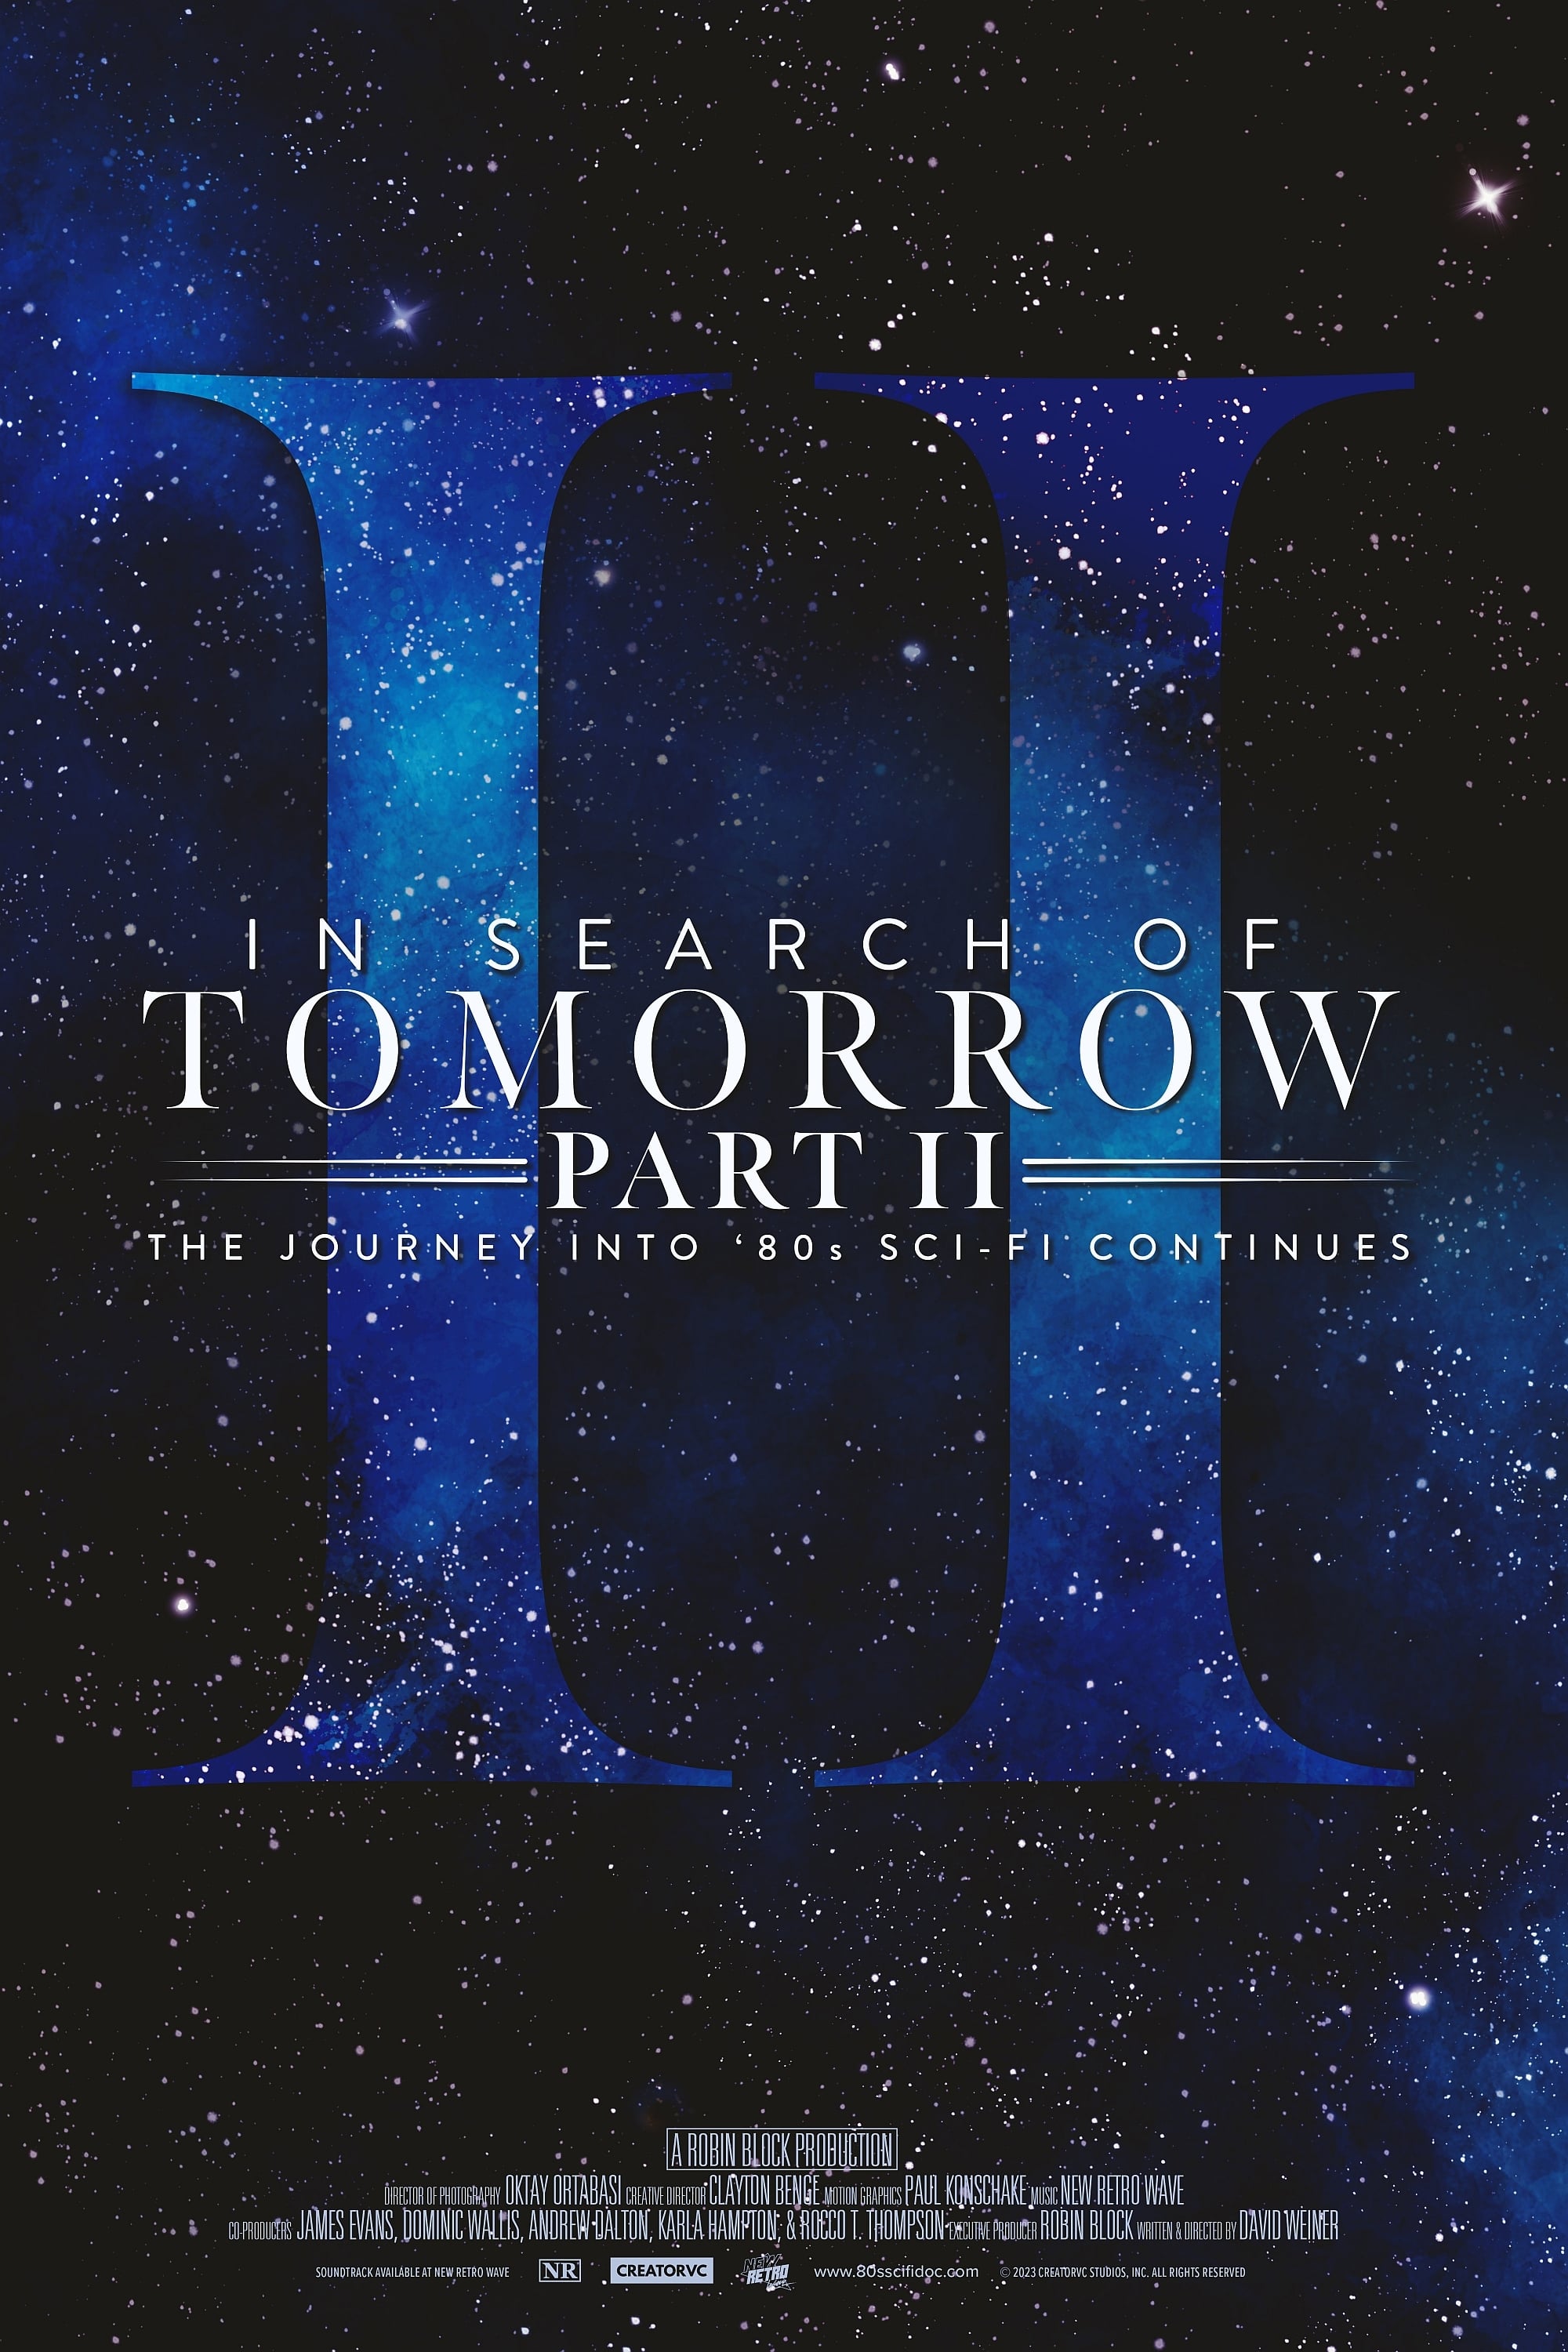 In Search of Tomorrow: Part II